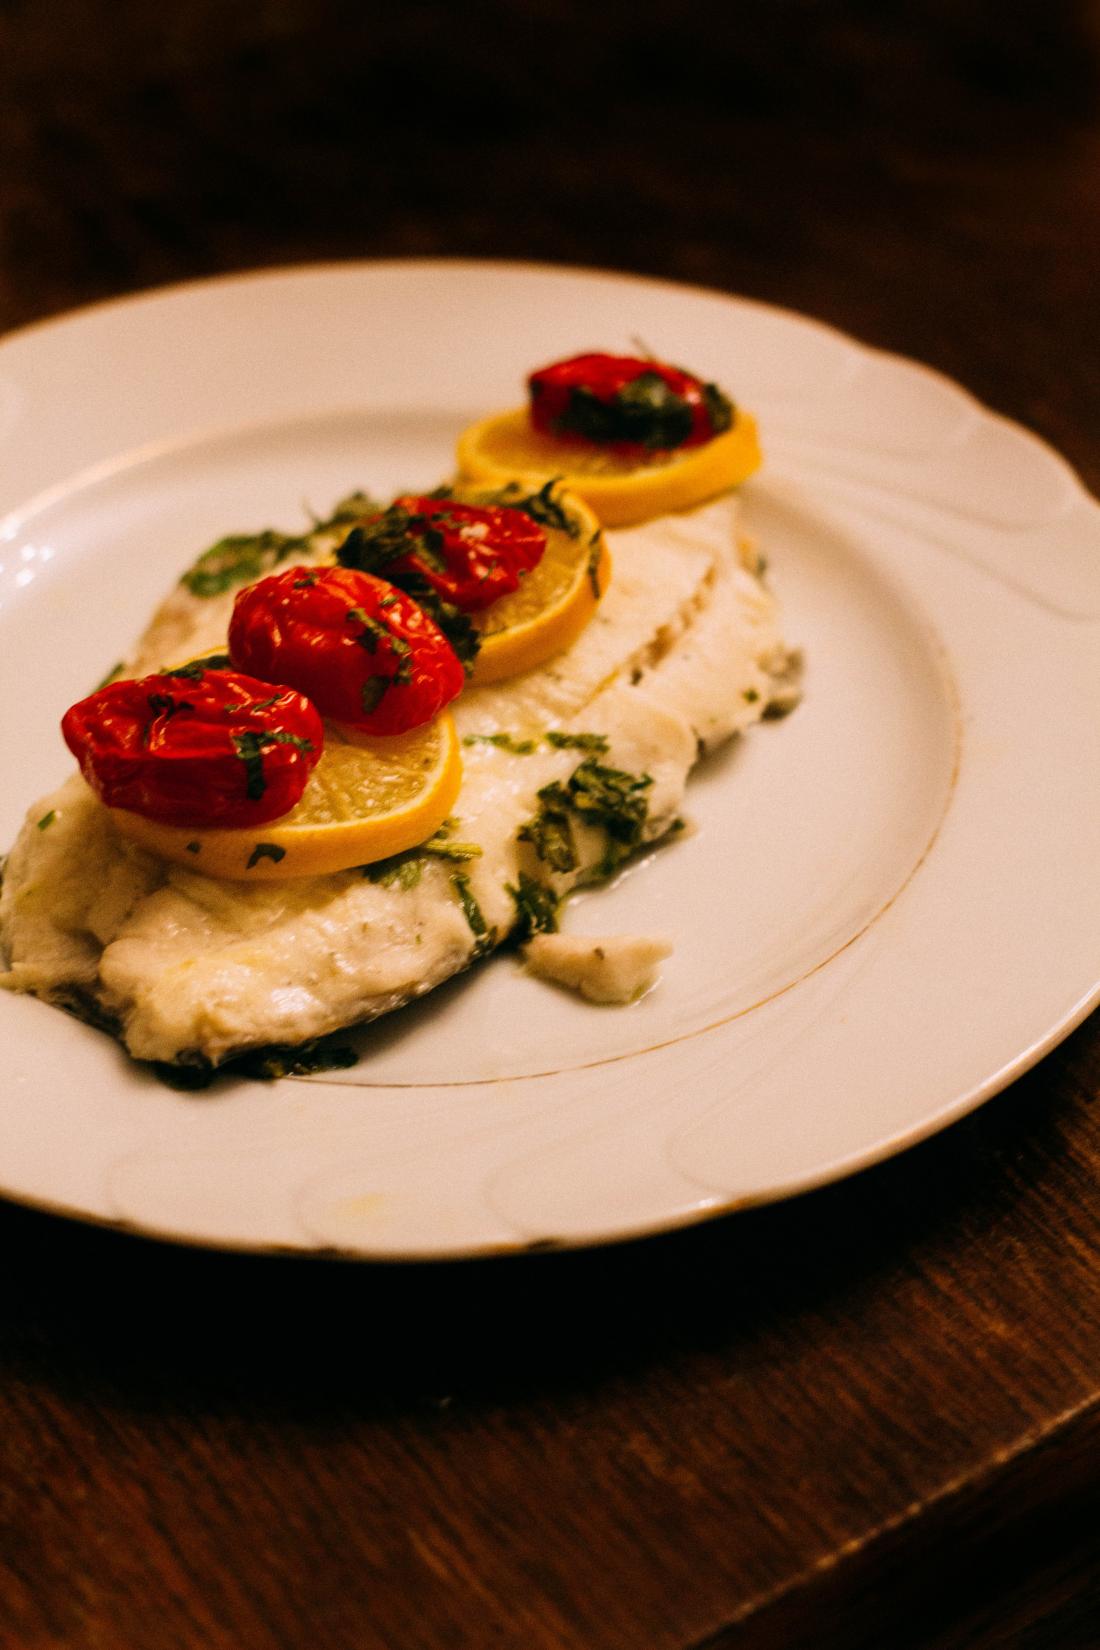 Whitefish filet topped with lemon and cherry tomatoes.